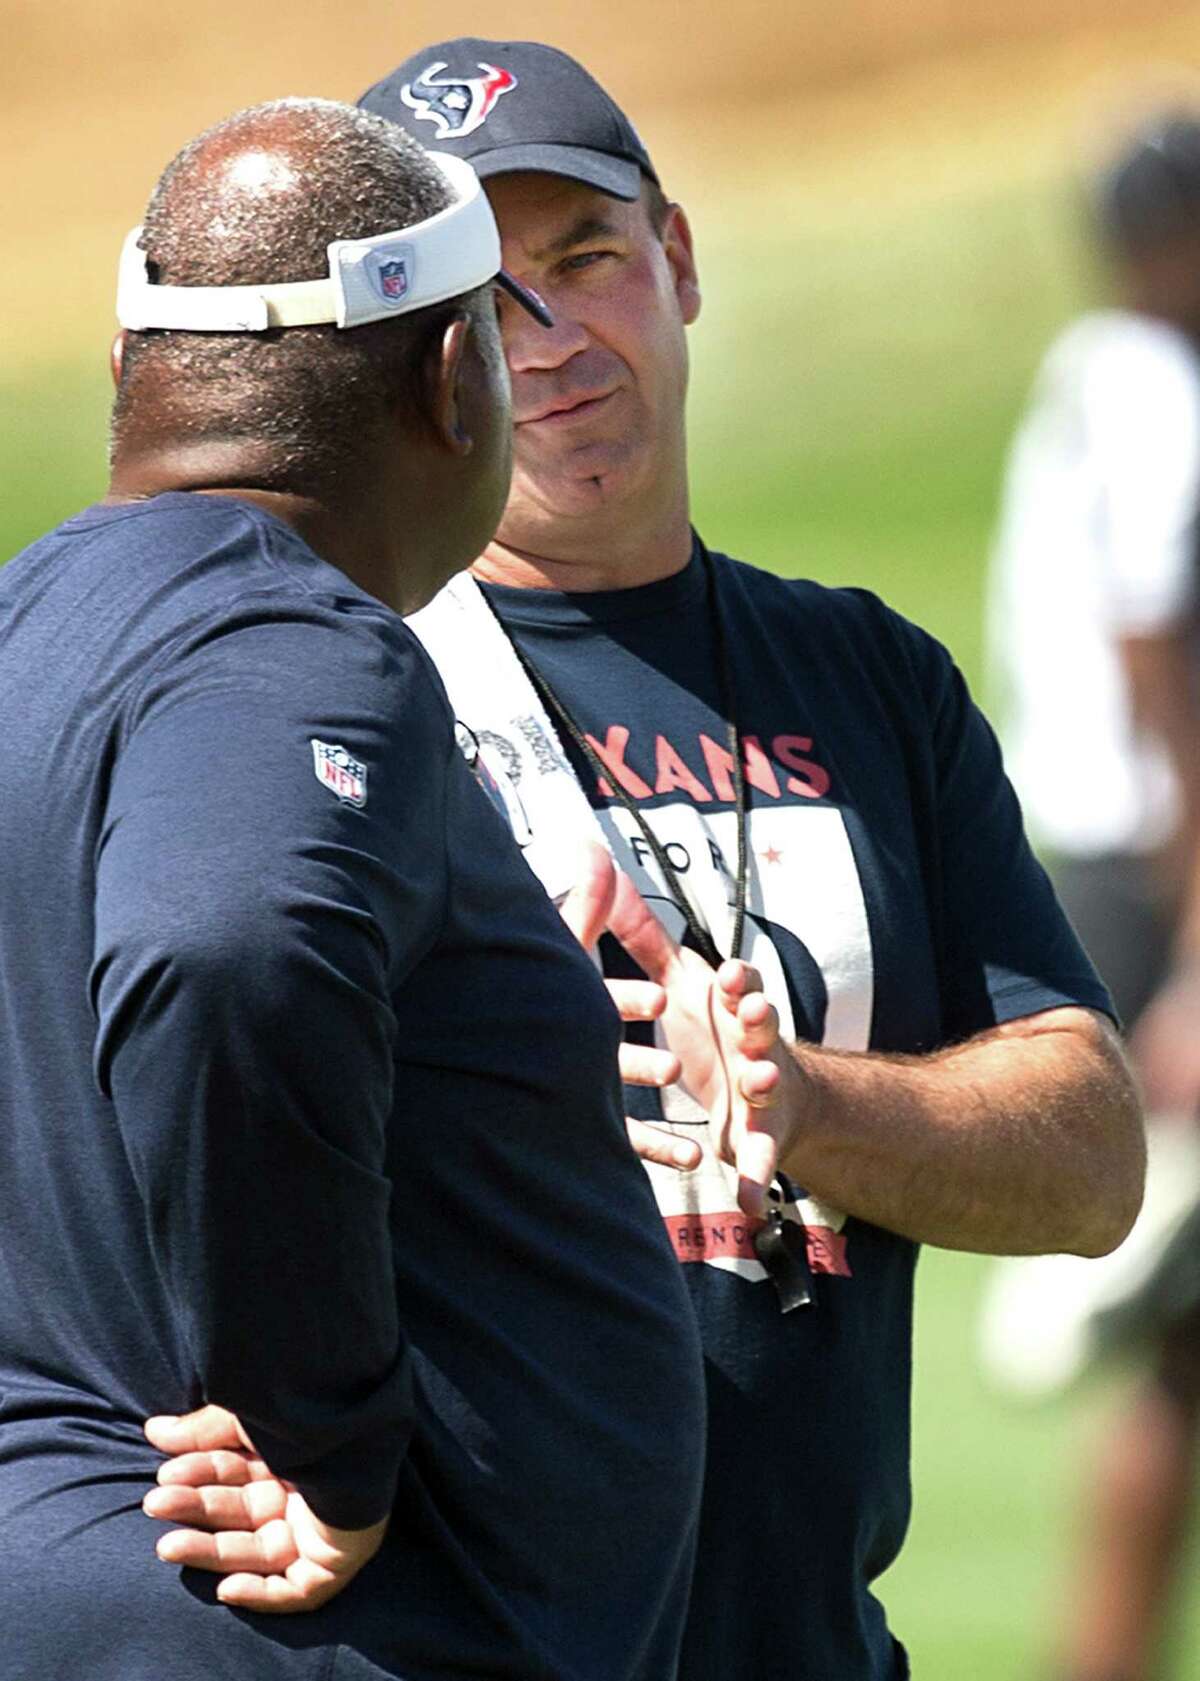 Houston Texans head coach Bill O'Brien, right, talks to defensive coordinator Romero Crennel during a joint practice with the Denver Broncos at the Broncos training facility on Thursday, Aug. 21, 2014, in Englewood, Colo. ( Brett Coomer / Houston Chronicle )